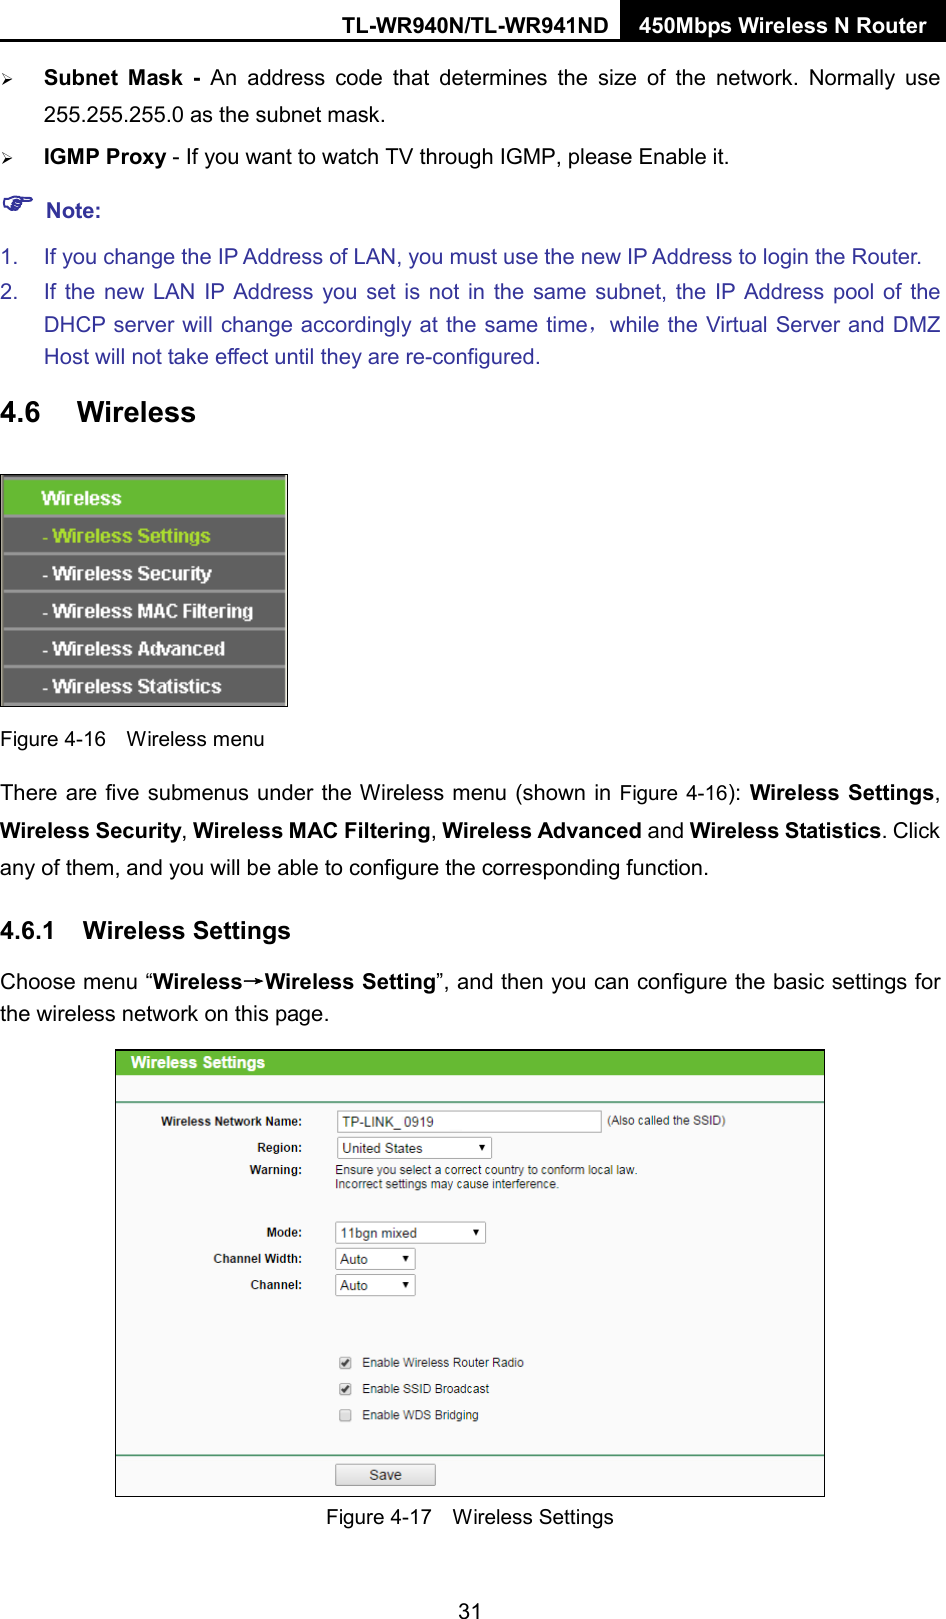 TL-WR940N/TL-WR941ND 450Mbps Wireless N Router   Subnet Mask - An address code that determines the size of the network. Normally use 255.255.255.0 as the subnet mask.    IGMP Proxy - If you want to watch TV through IGMP, please Enable it.  Note: 1. If you change the IP Address of LAN, you must use the new IP Address to login the Router.   2. If the new LAN IP Address you set is not in the same subnet, the IP Address pool of the DHCP server will change accordingly at the same time，while the Virtual Server and DMZ Host will not take effect until they are re-configured. 4.6 Wireless  Figure 4-16  Wireless menu There are five submenus under the Wireless menu (shown in Figure 4-16): Wireless Settings, Wireless Security, Wireless MAC Filtering, Wireless Advanced and Wireless Statistics. Click any of them, and you will be able to configure the corresponding function.   4.6.1 Wireless Settings Choose menu “Wireless→Wireless Setting”, and then you can configure the basic settings for the wireless network on this page.  Figure 4-17  Wireless Settings 31 